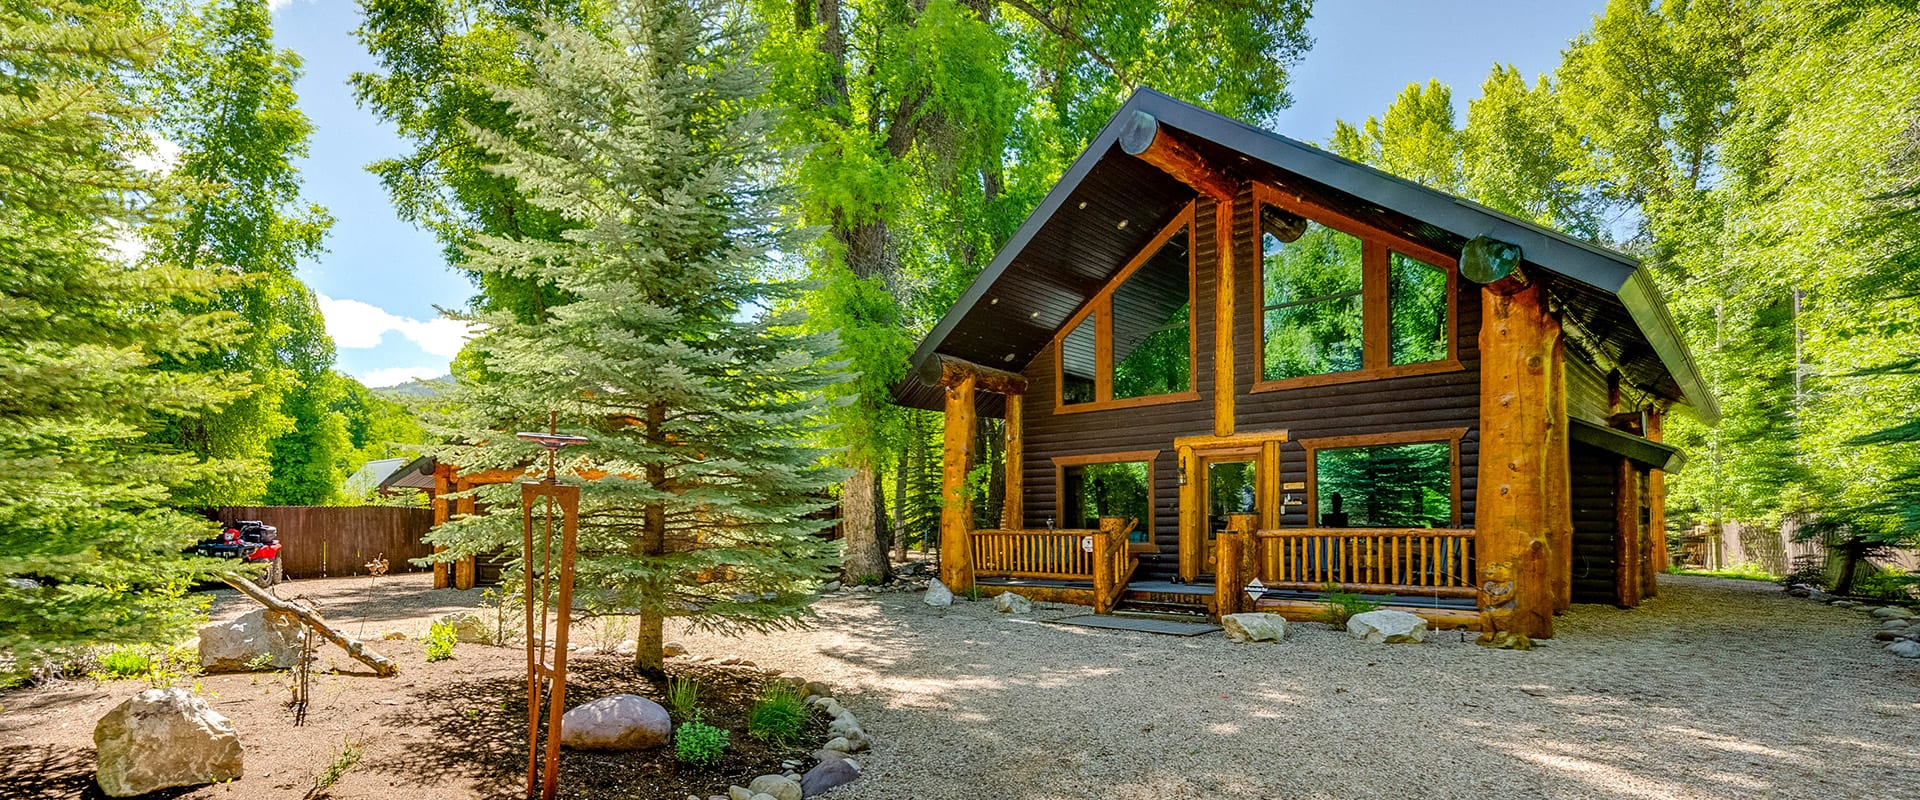 Exterior view of a modern log cabin with massive windows reflecting the towering green pines surrounding it.